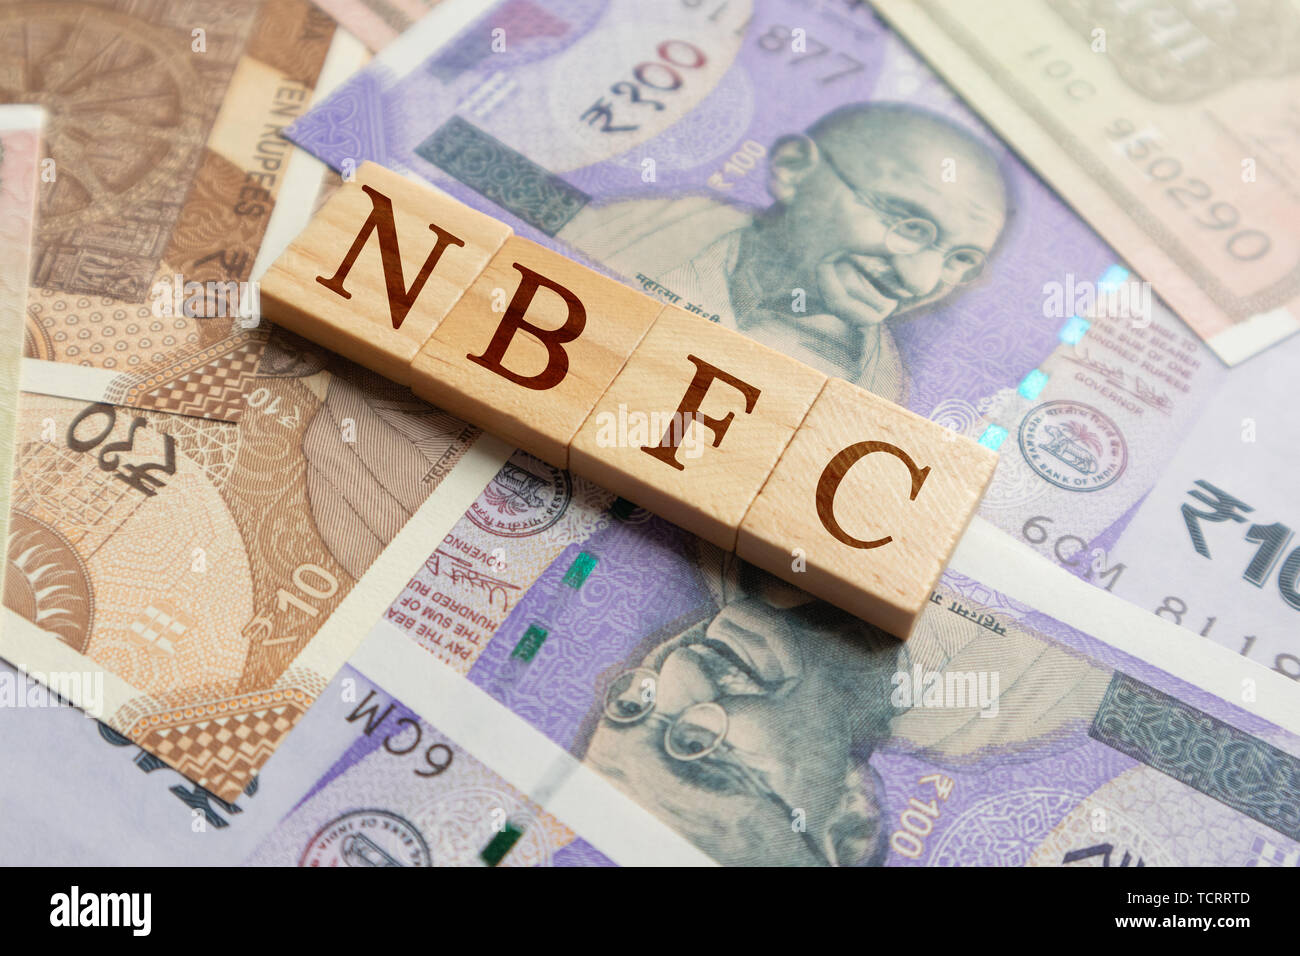 NBFC in wooden block letters on indian currency Stock Photo